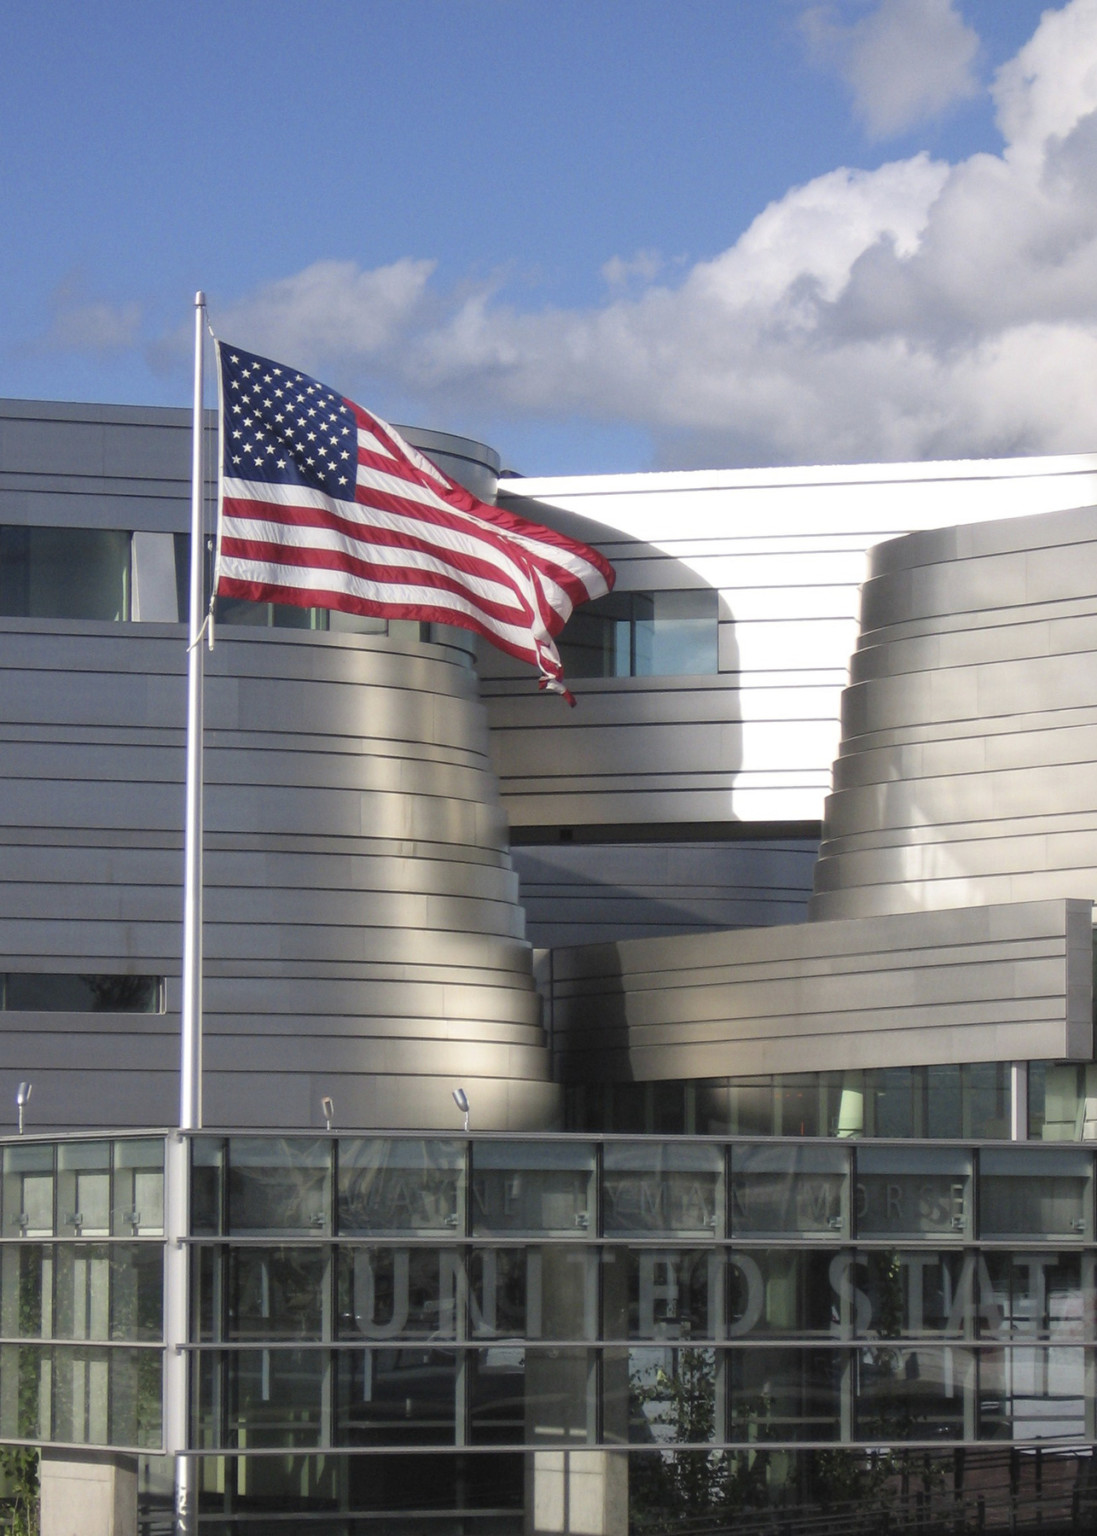 curved metal facade behind an american flag